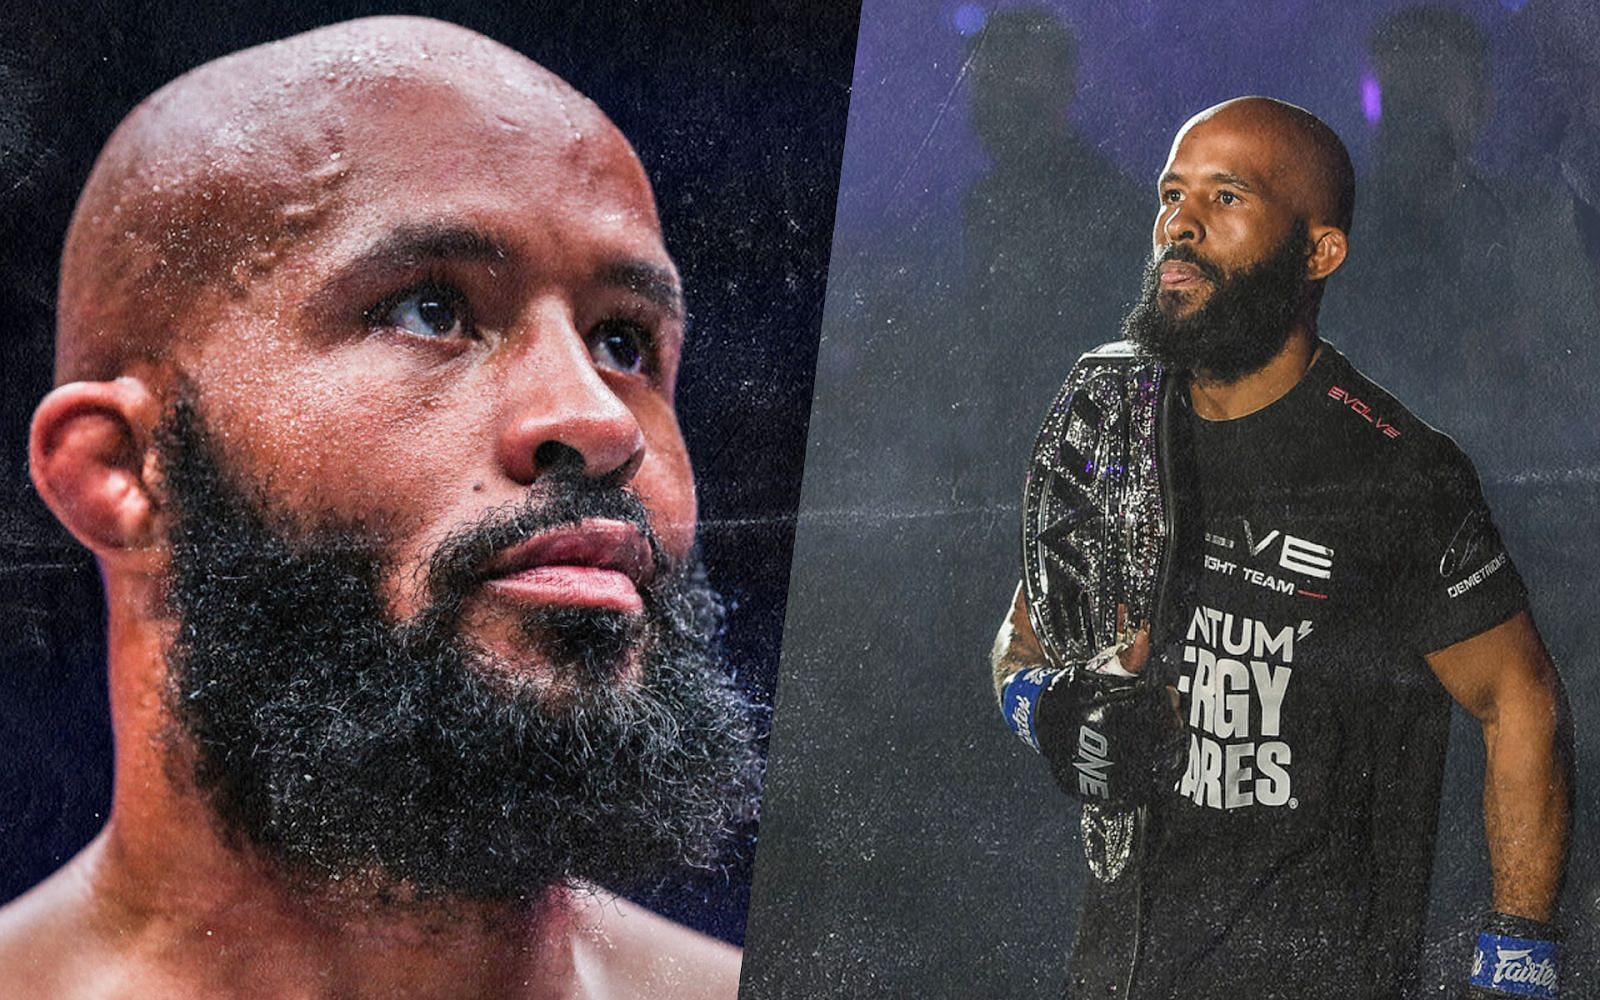 “I’m satisfied whether I get the belt or not” - Demetrious Johnson knows his legacy is secured